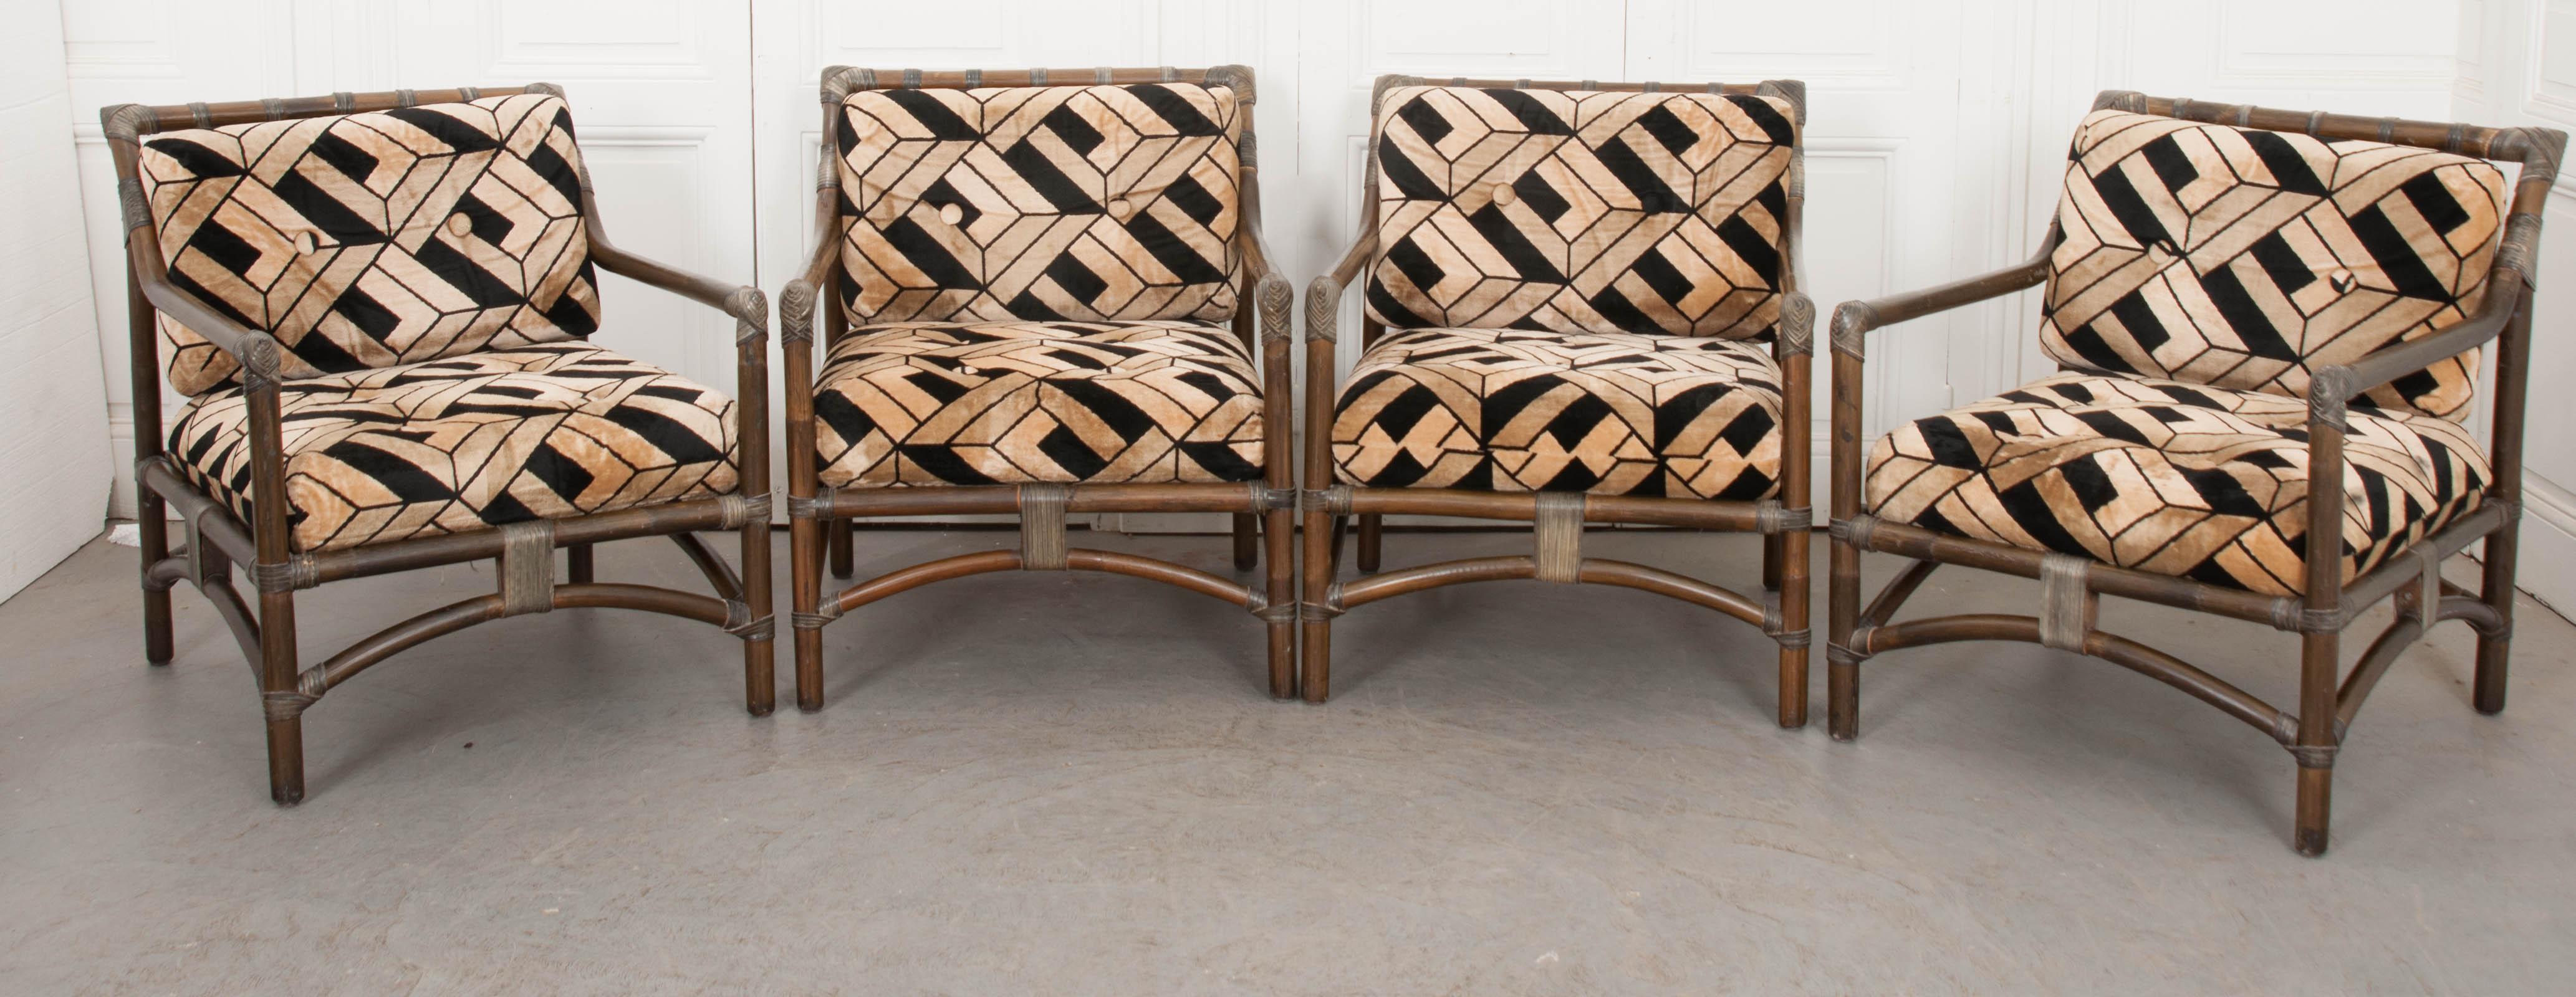 This fantastic set of four Mid-Century Modern rattan armchairs, circa 1970s, are from France. These chairs have leather strap accents and are newly upholstered in a fabulous black and creamy-gold geometric velvet upholstery reminiscent of the era.